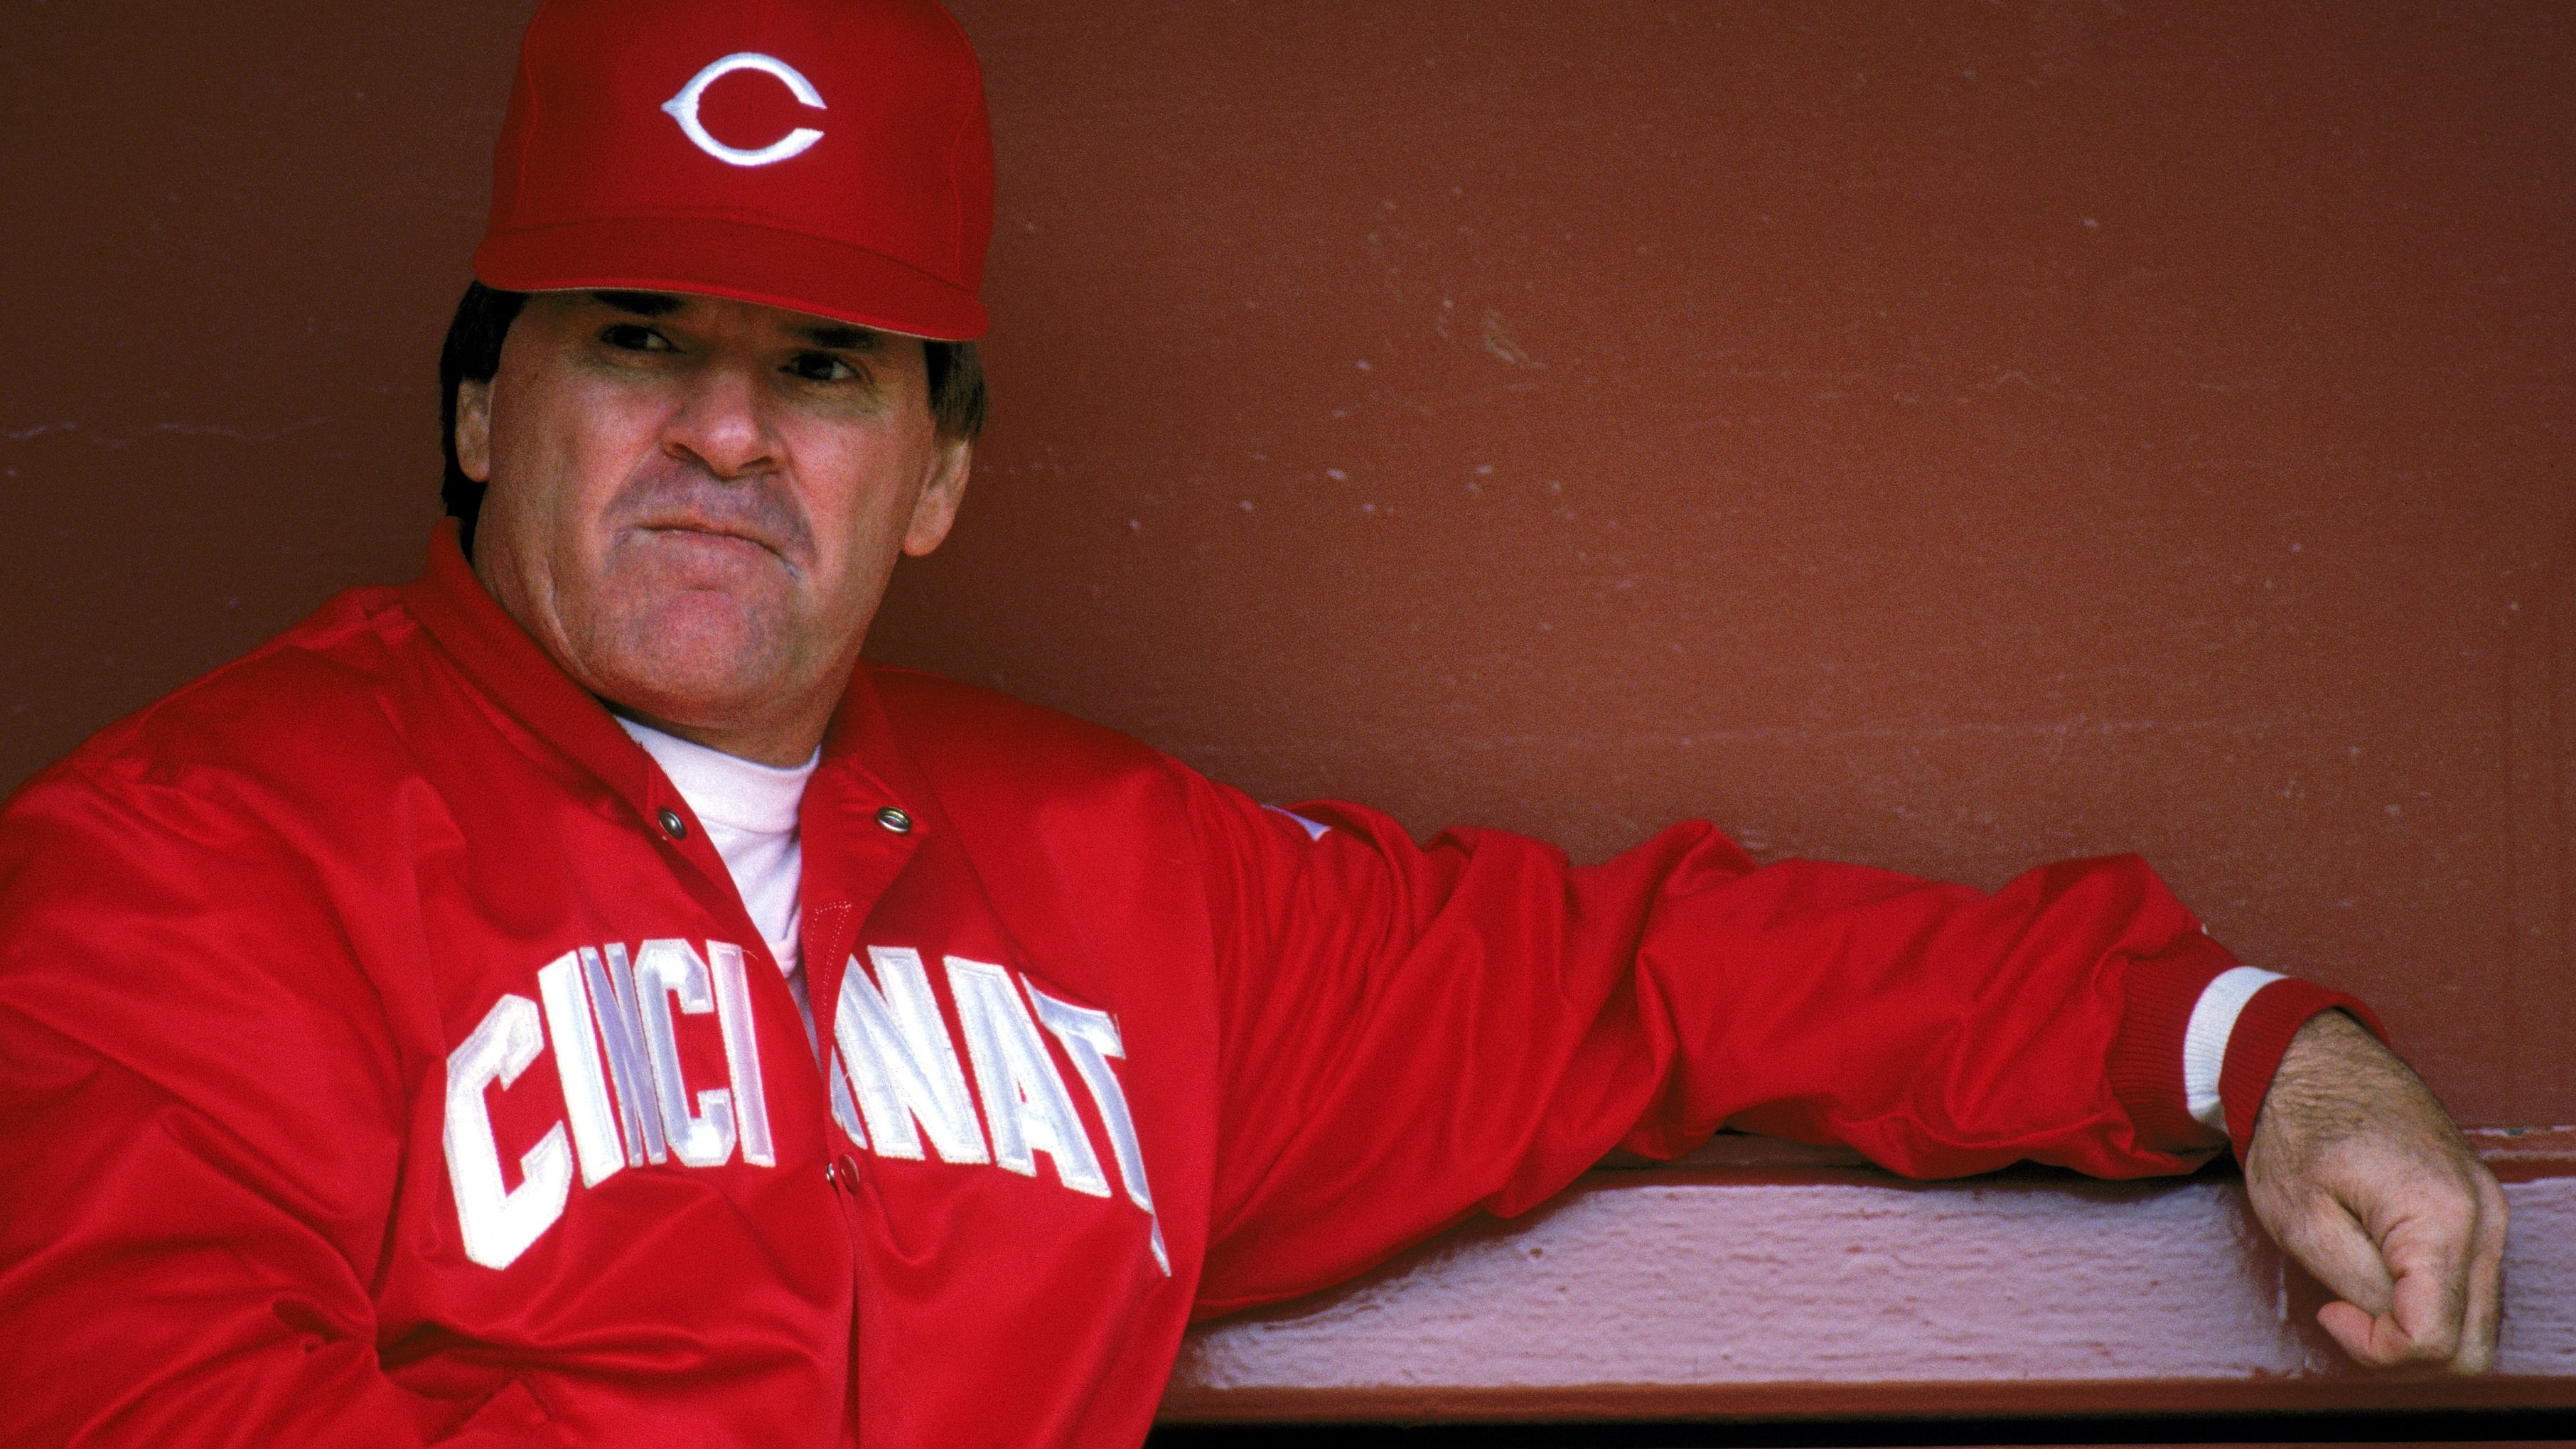 On this date in Reds history, 3/10/1963, rookie Pete Rose makes